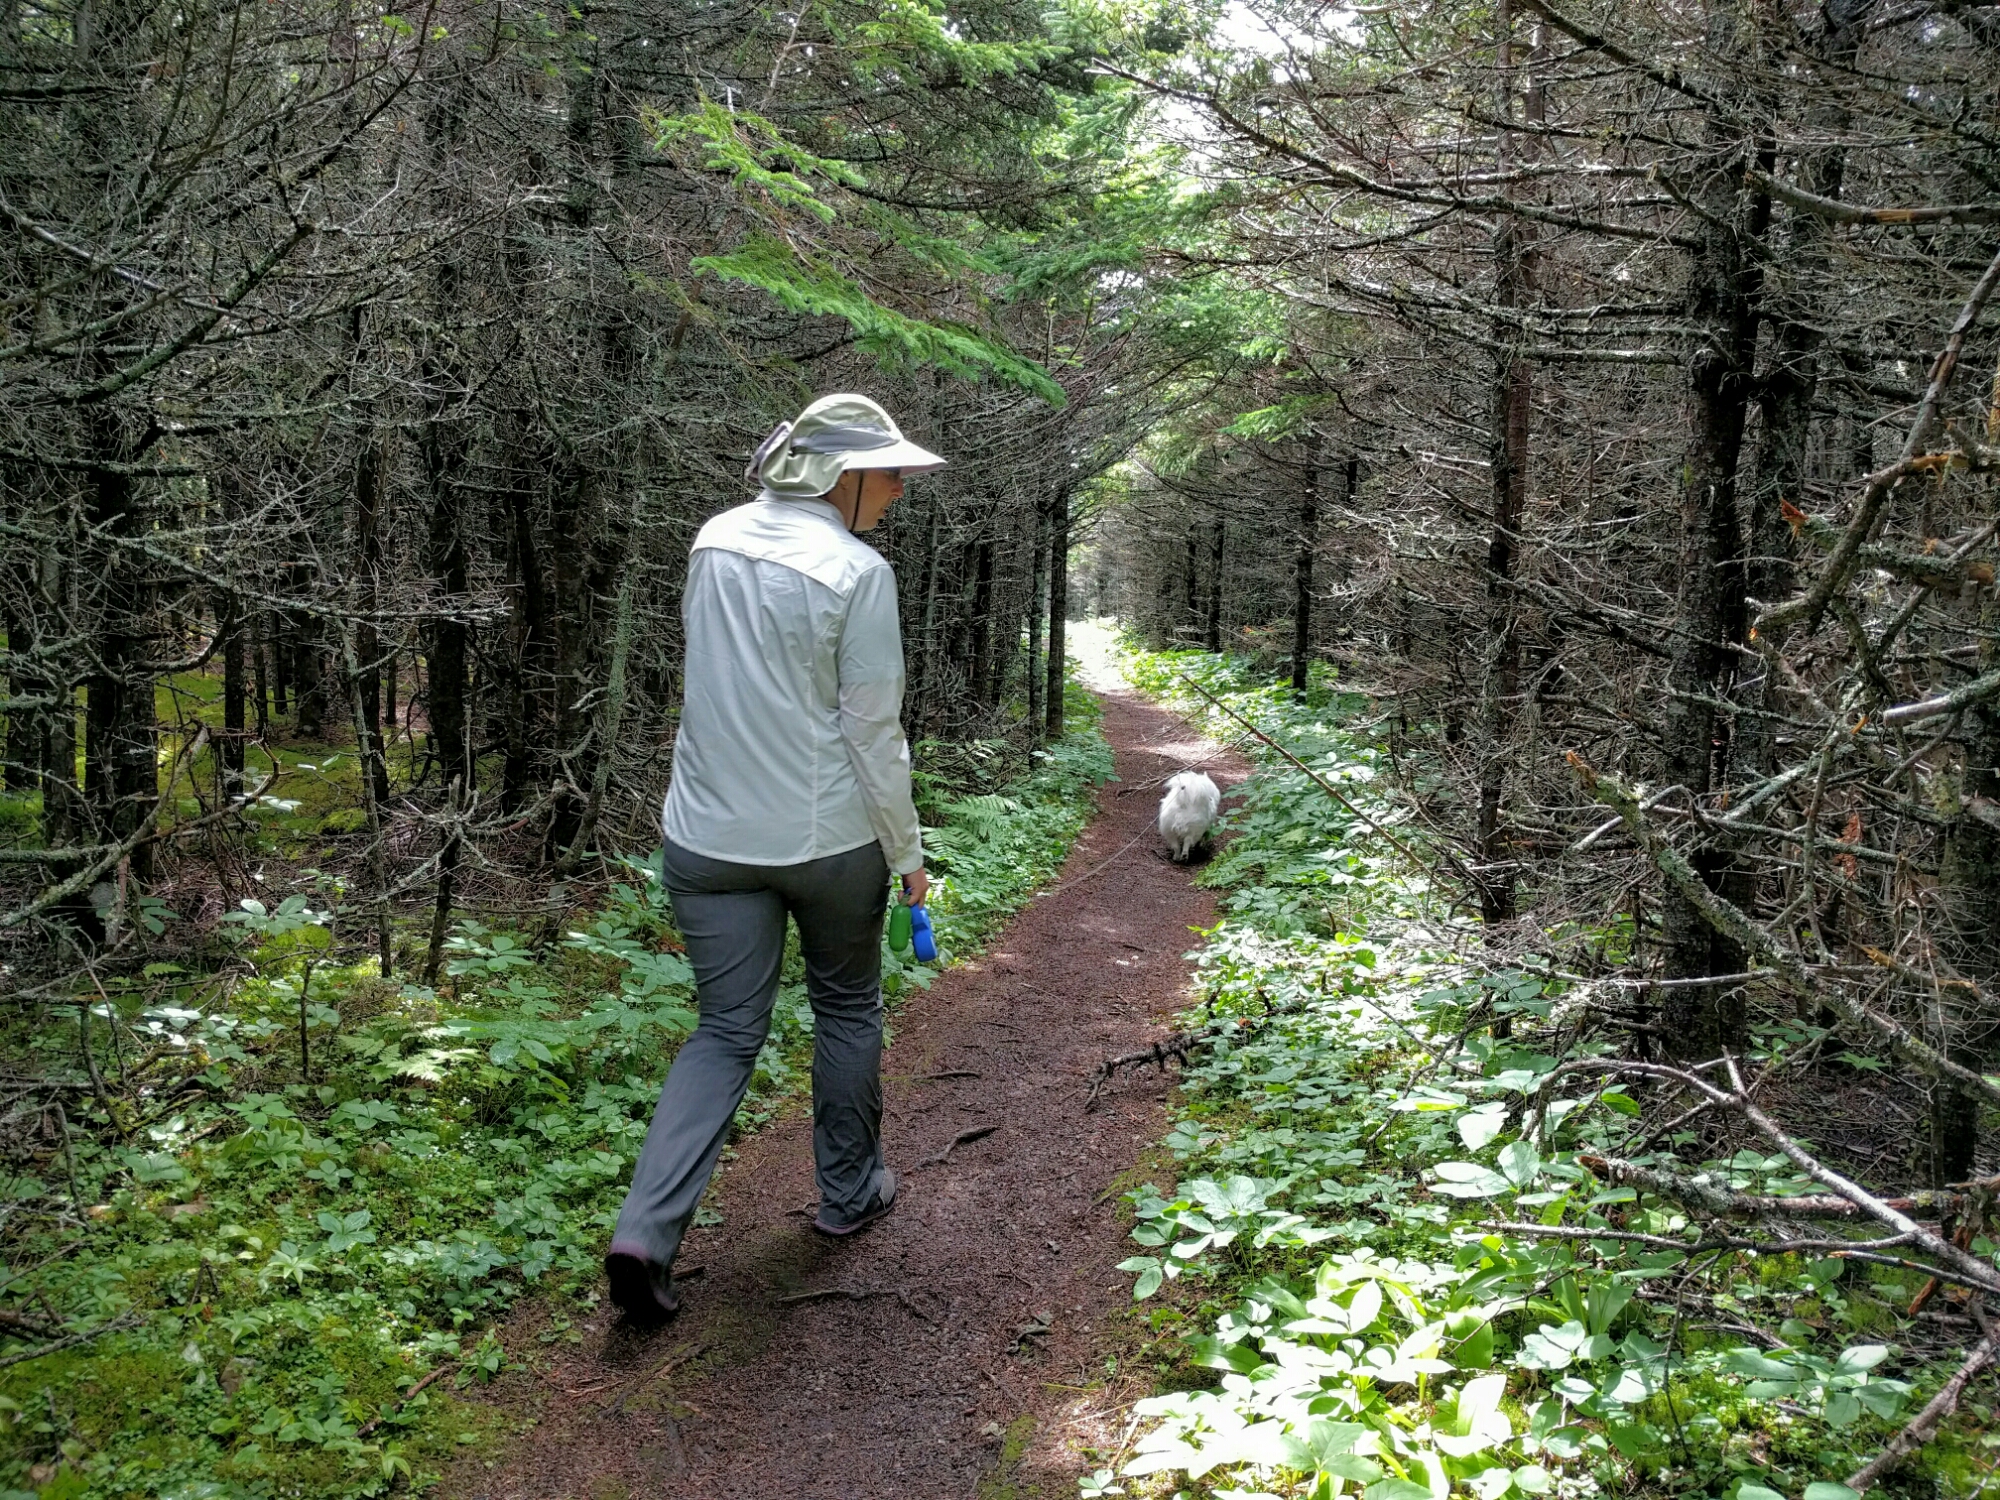 Alison and Fletcher hike the Costal Trails at Gros Morne.